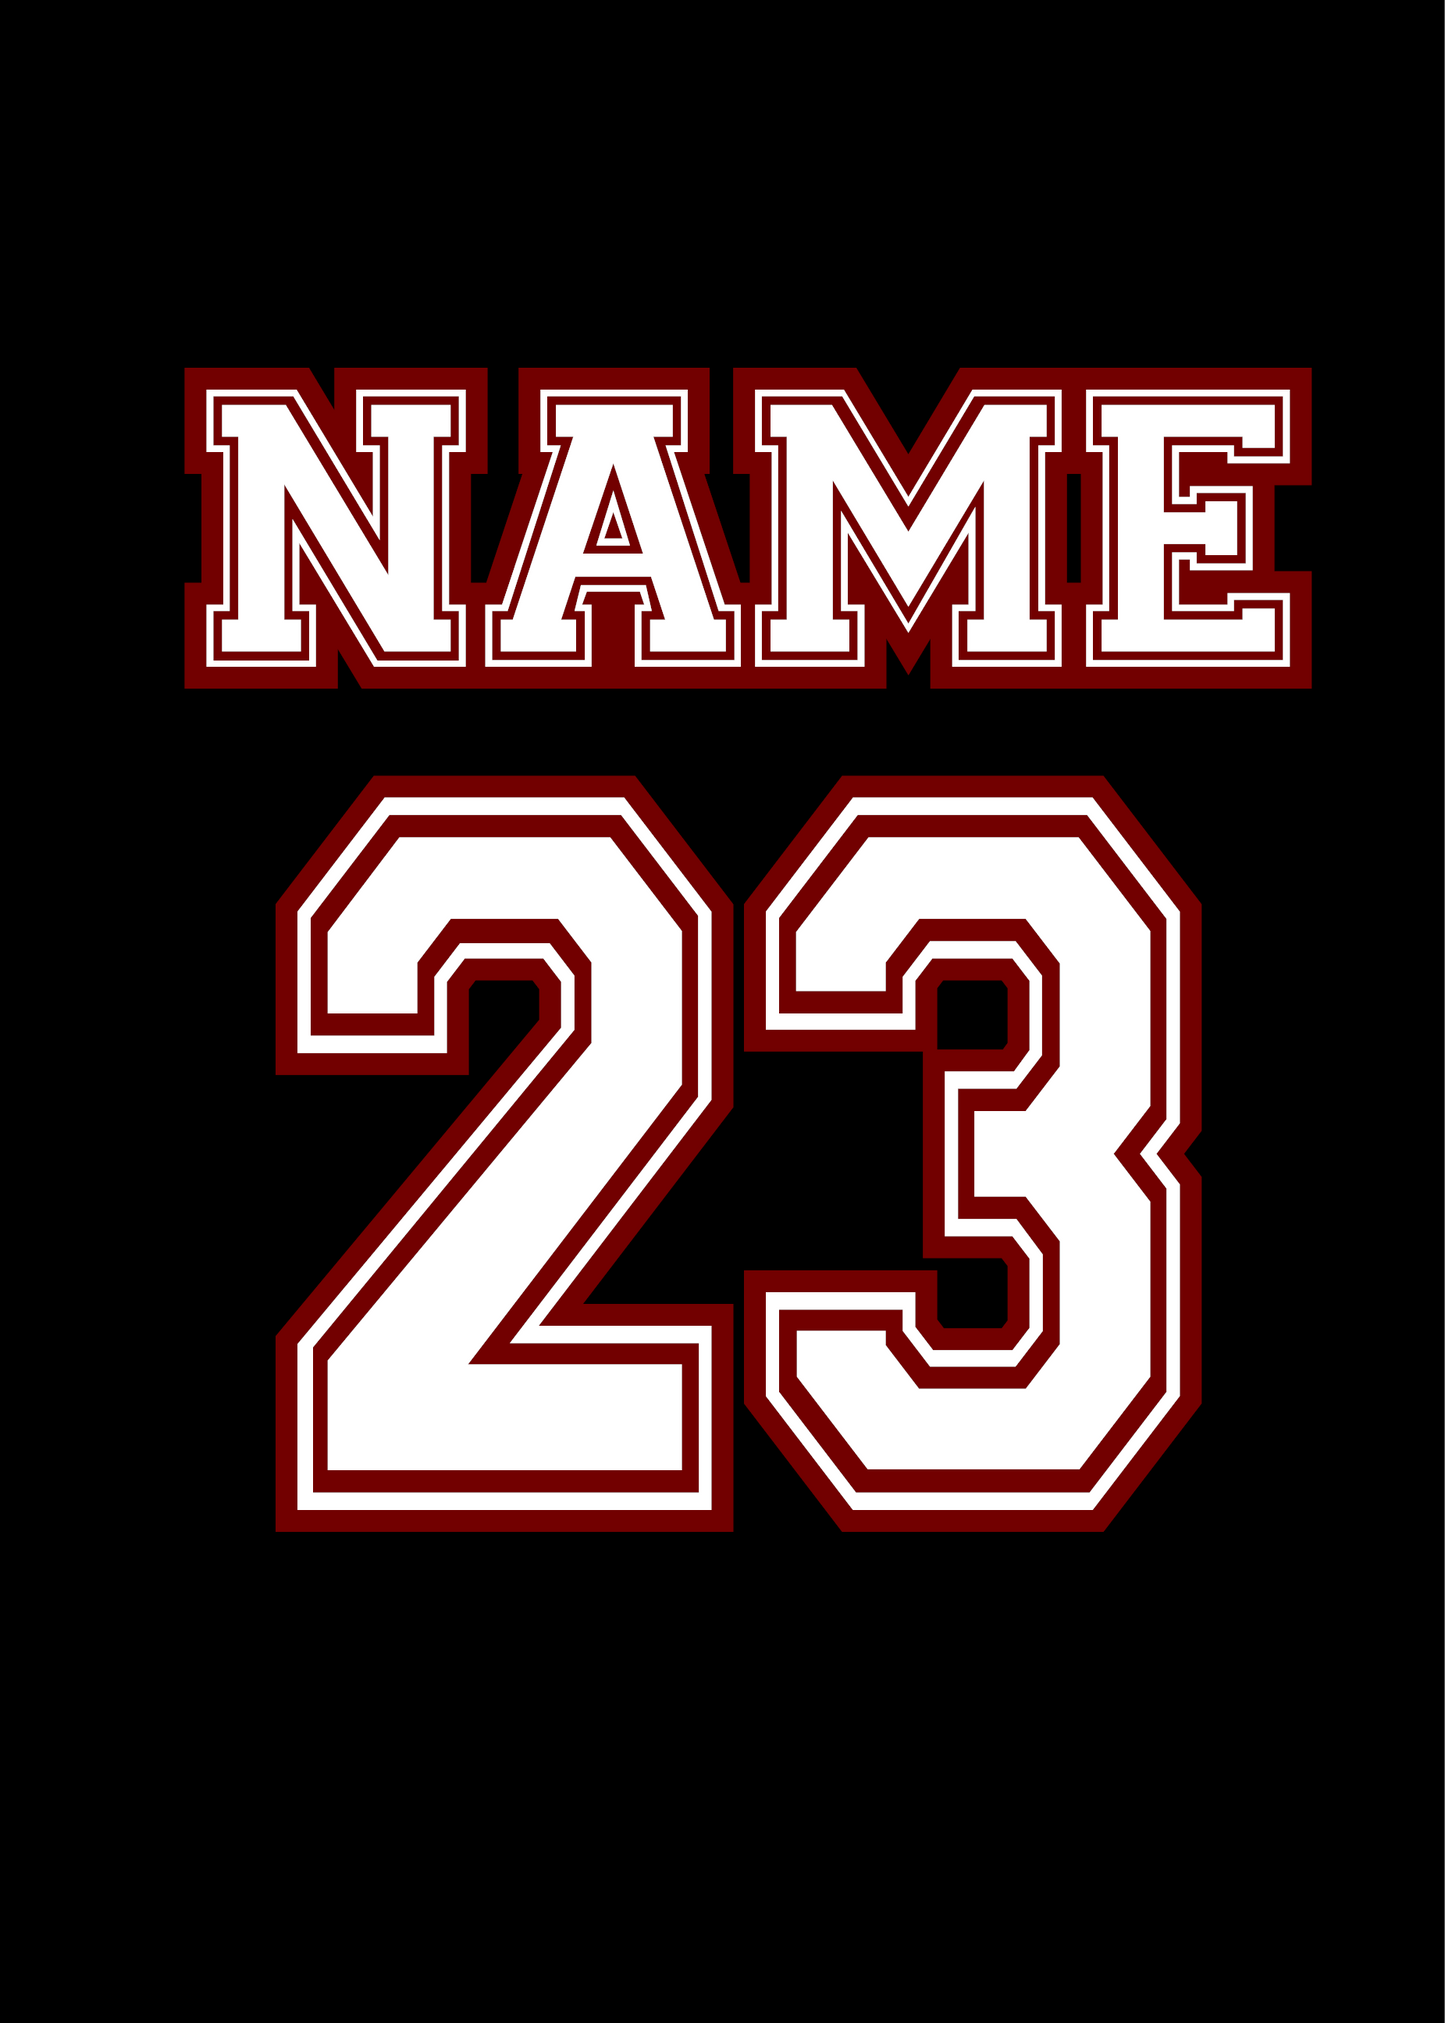 Knox Redskins Baseball T-shirt - Red or Grey - Adult and Youth Sizes - Name/Number Back